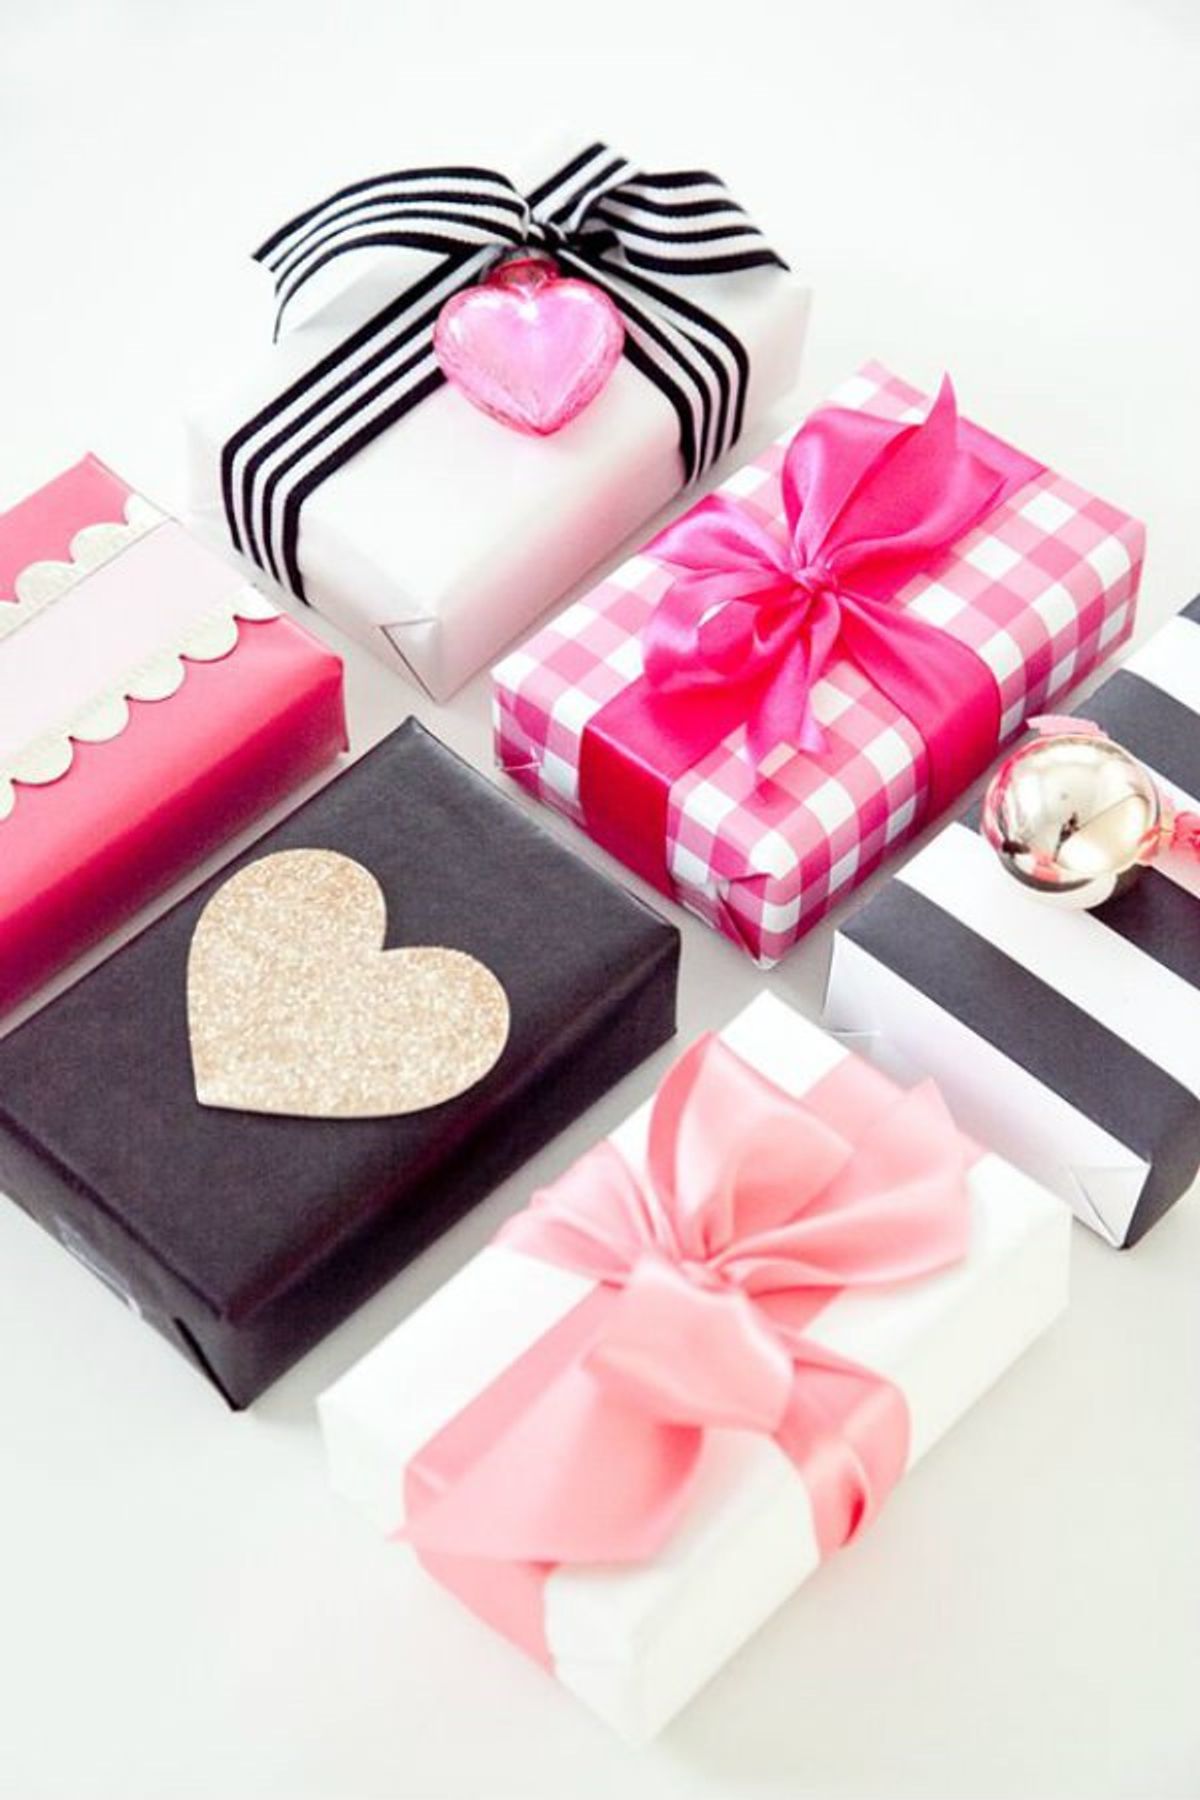 10 Gifts You Can Buy For Your Valentine That Aren't Cliche AF